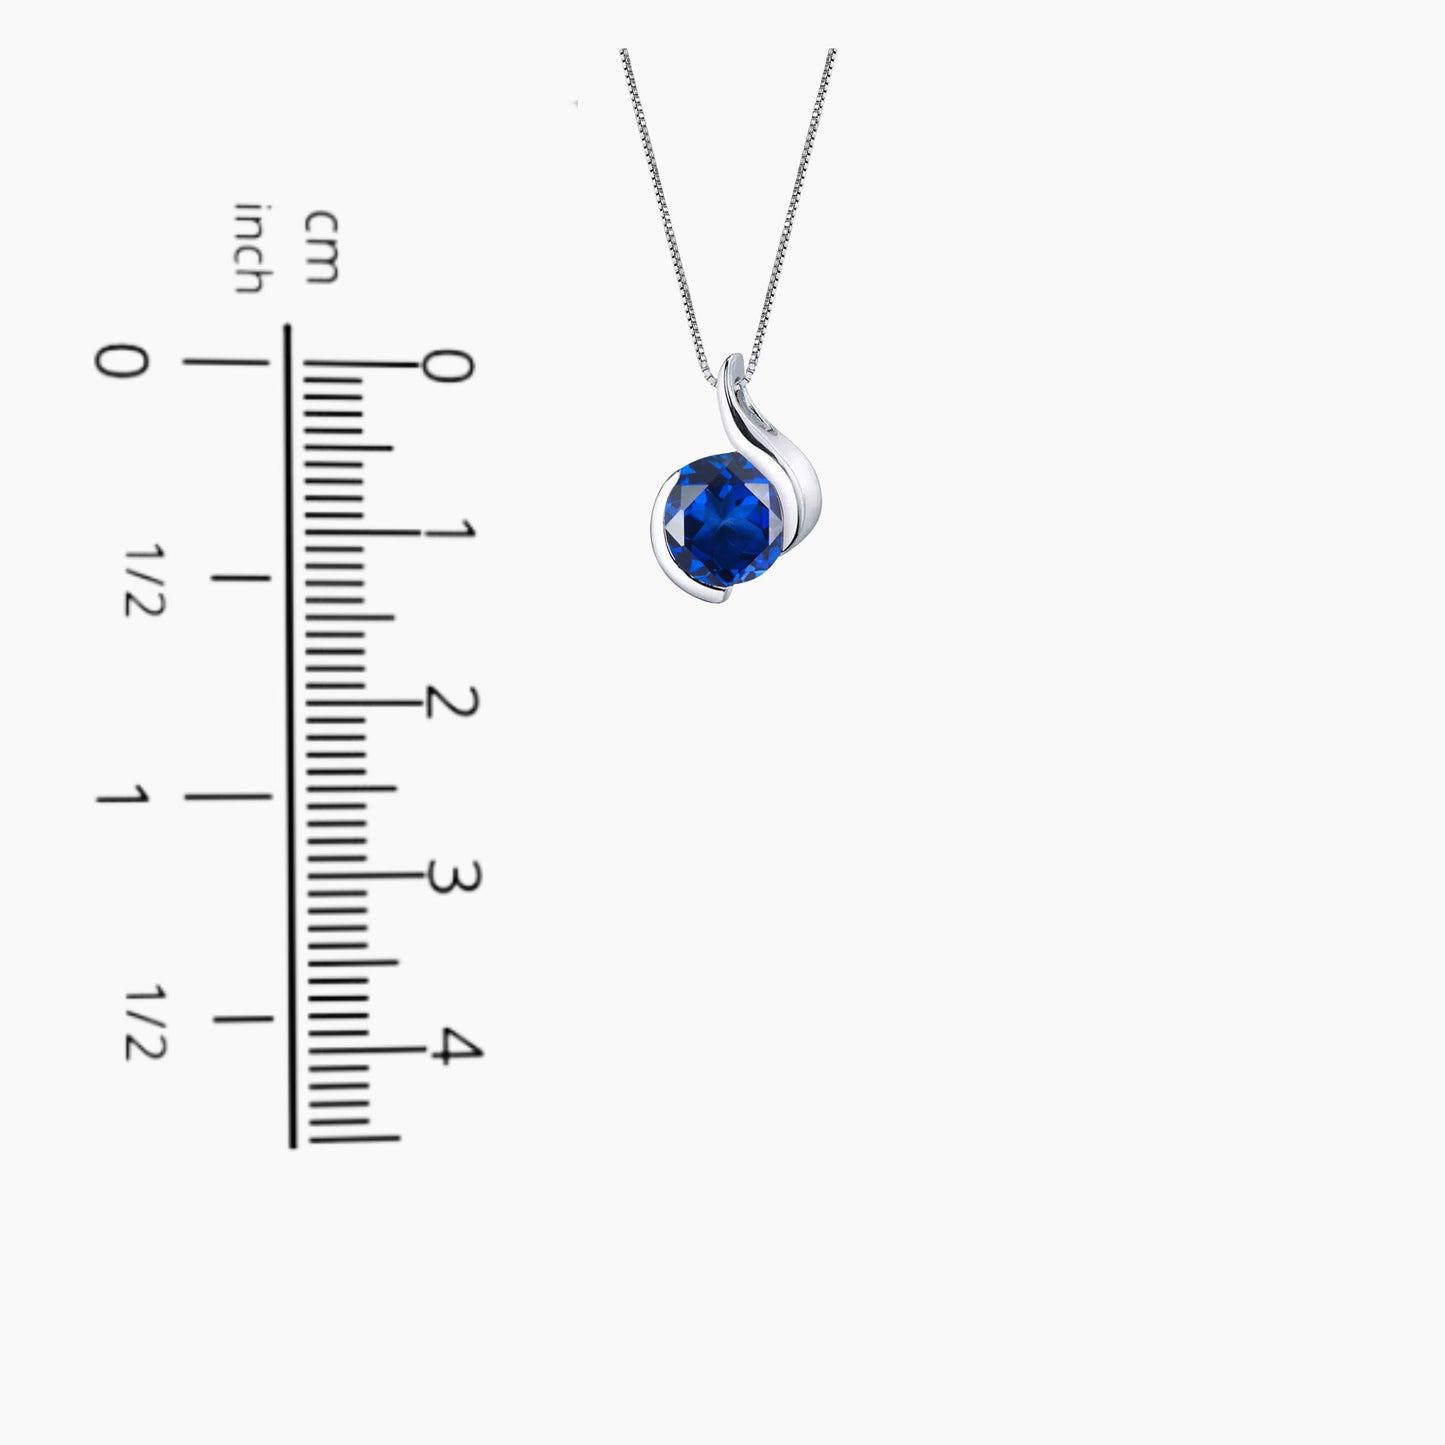 Sapphire Monarch Pendant Necklace in Sterling Silver